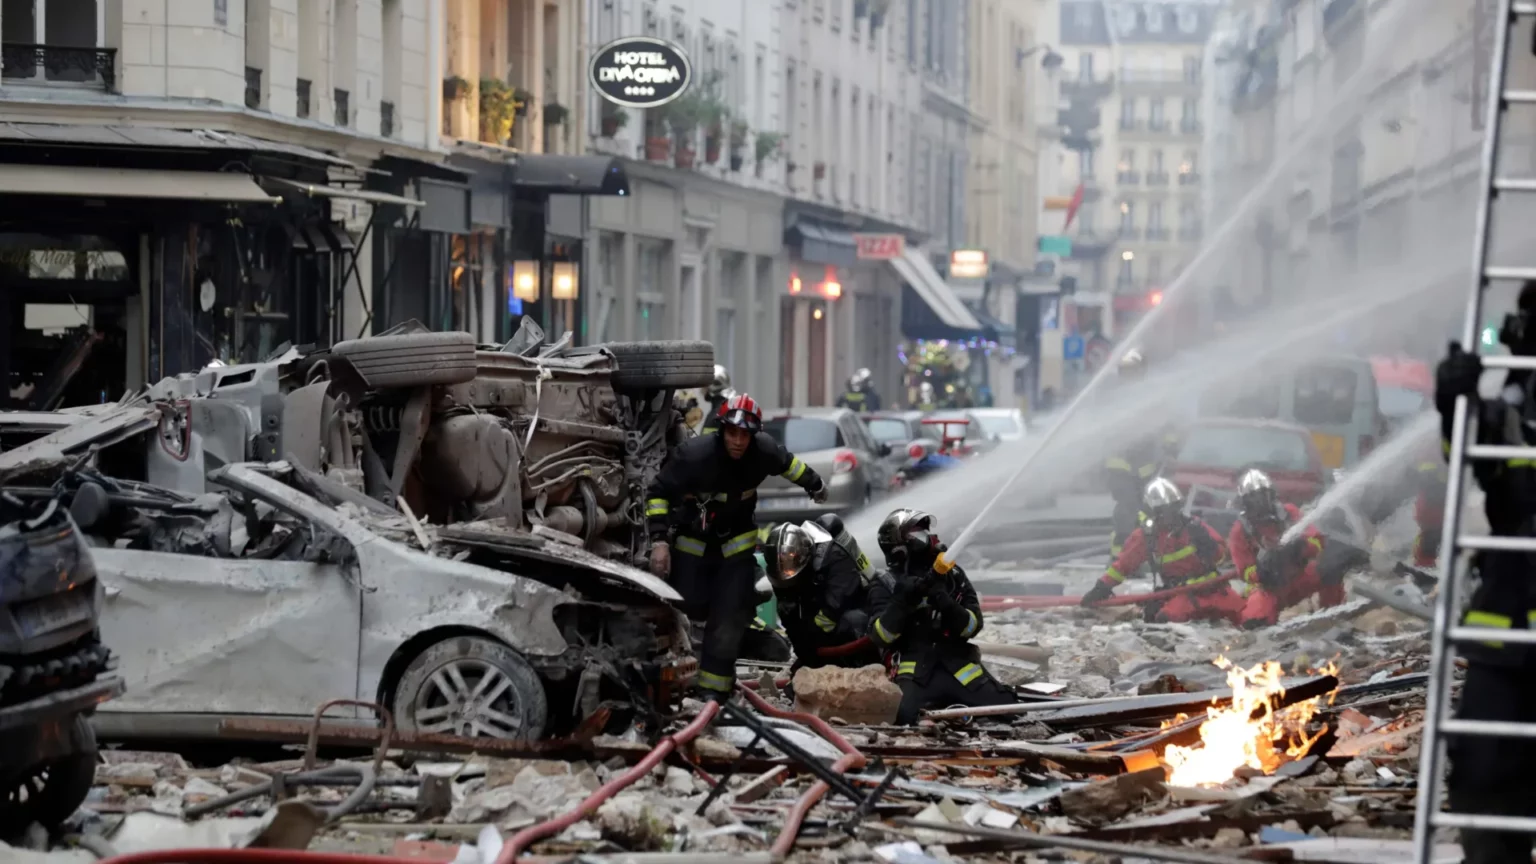 At least 37 injured in the Paris blast, sniffer dogs find smell in the ruins - Asiana Times